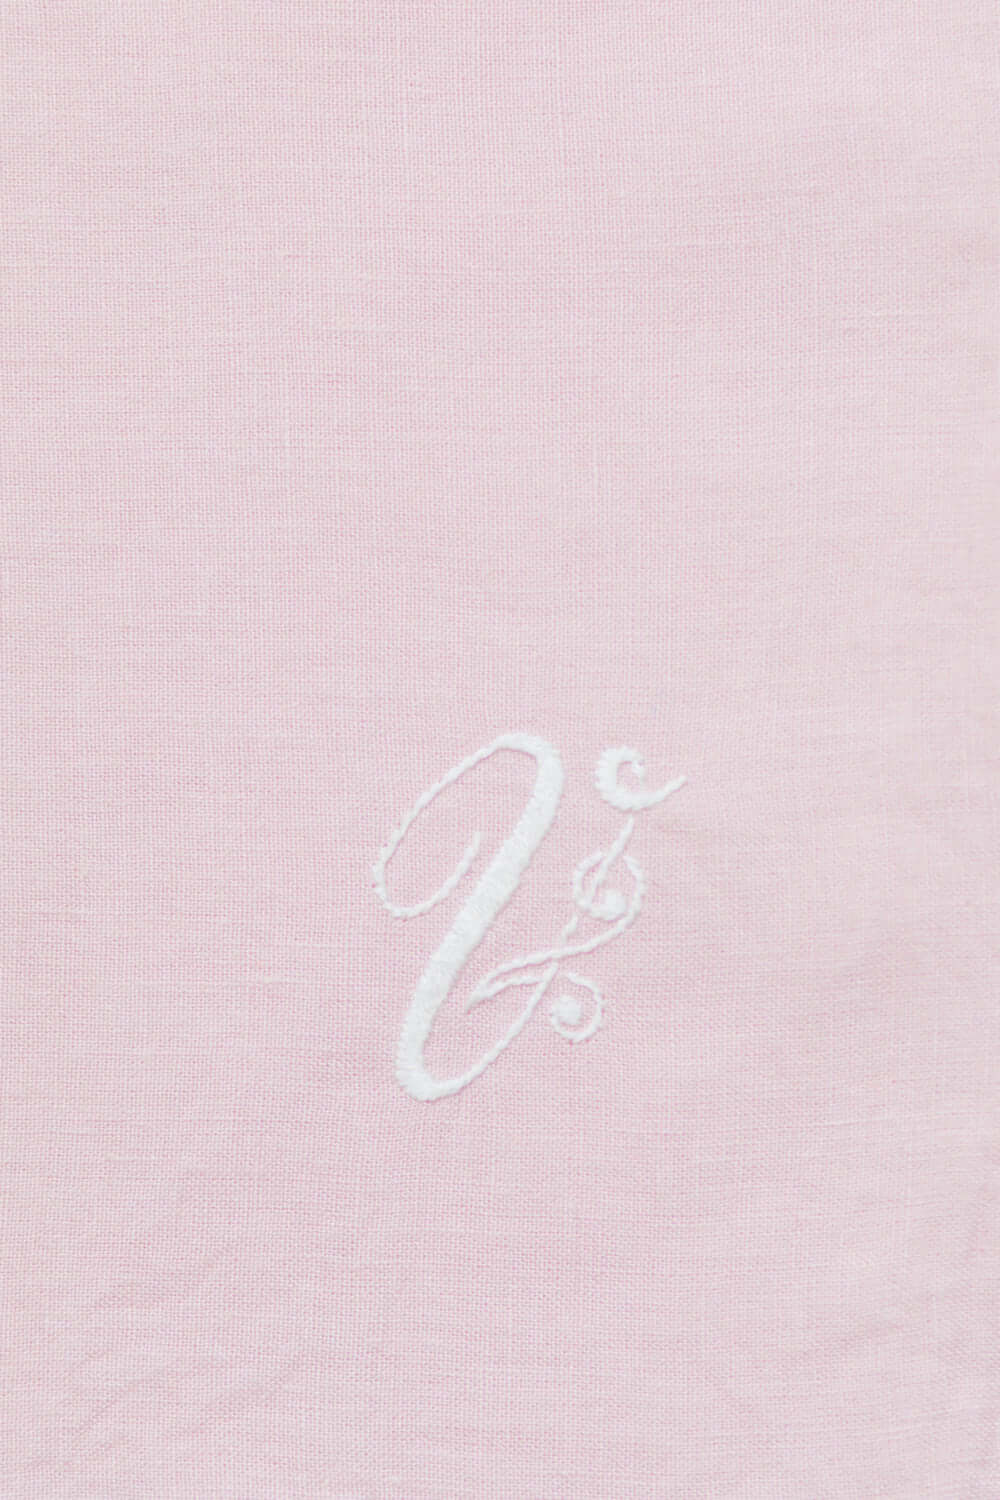 BE PERSONALIZED/ Monogram Your Initials On Your Shirt, Pajama , Bag Or Any Other Clothing/ Embroidered By Hands Monograms/